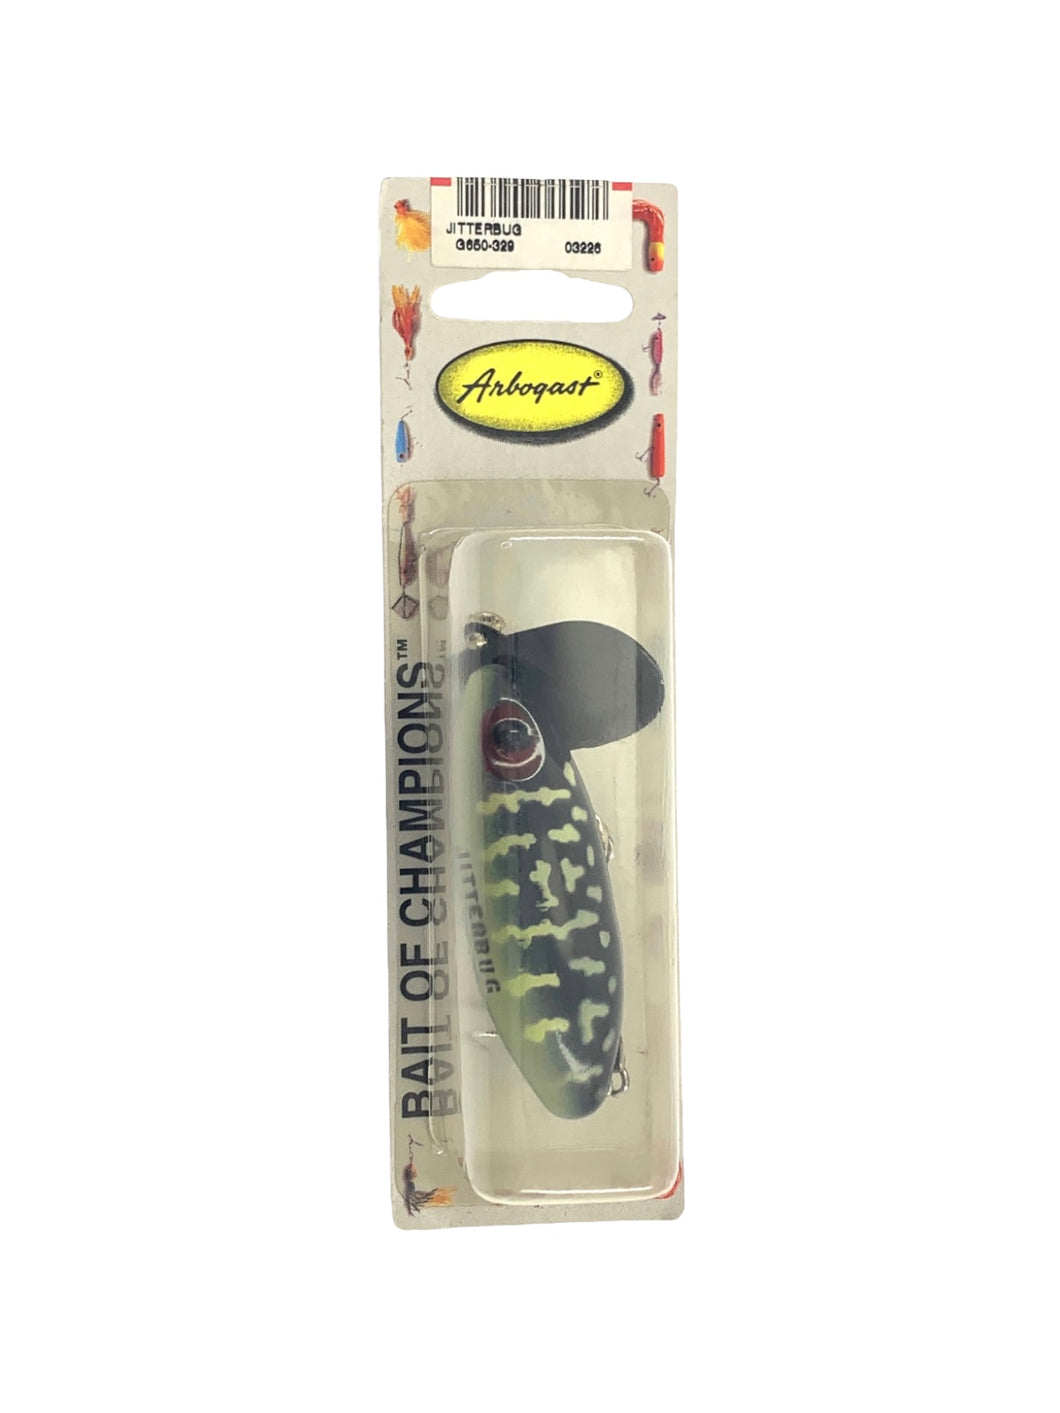 5/8 oz Fred Arbogast Jitterbug Fishing Lure for Japanese Market — GLOW IN THE DARK